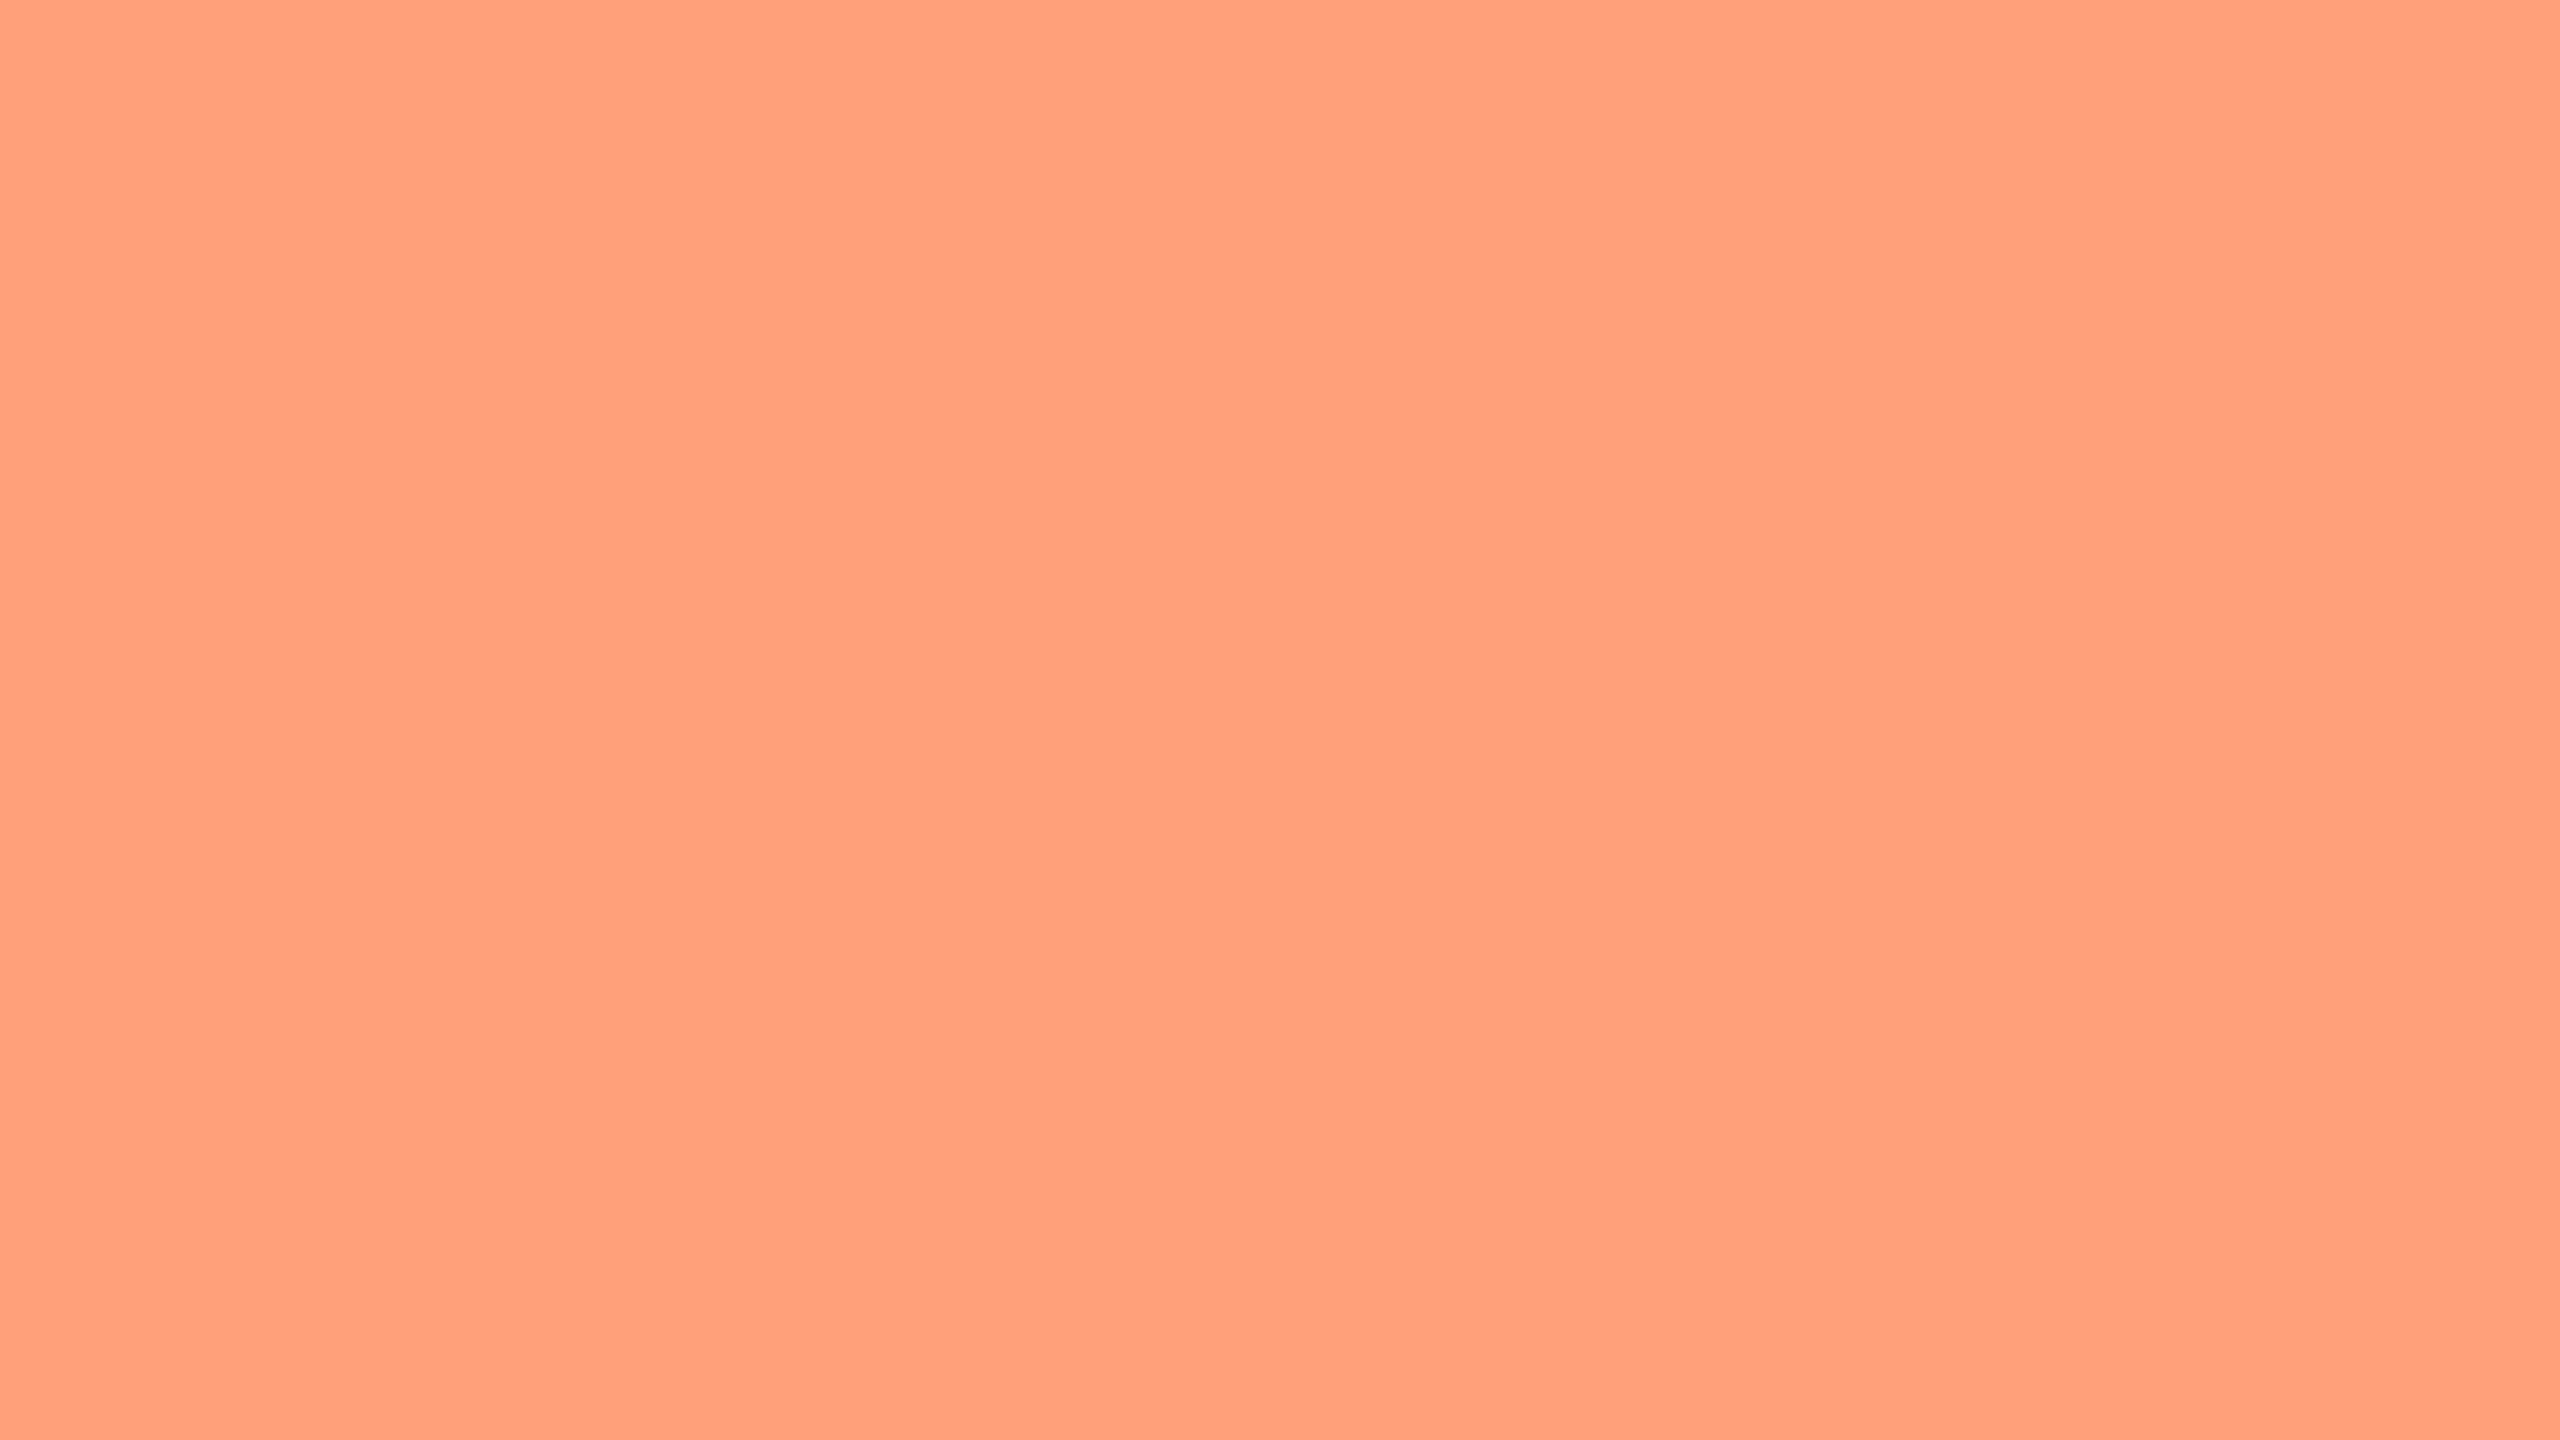 Background Color Solid Salmon Light Image